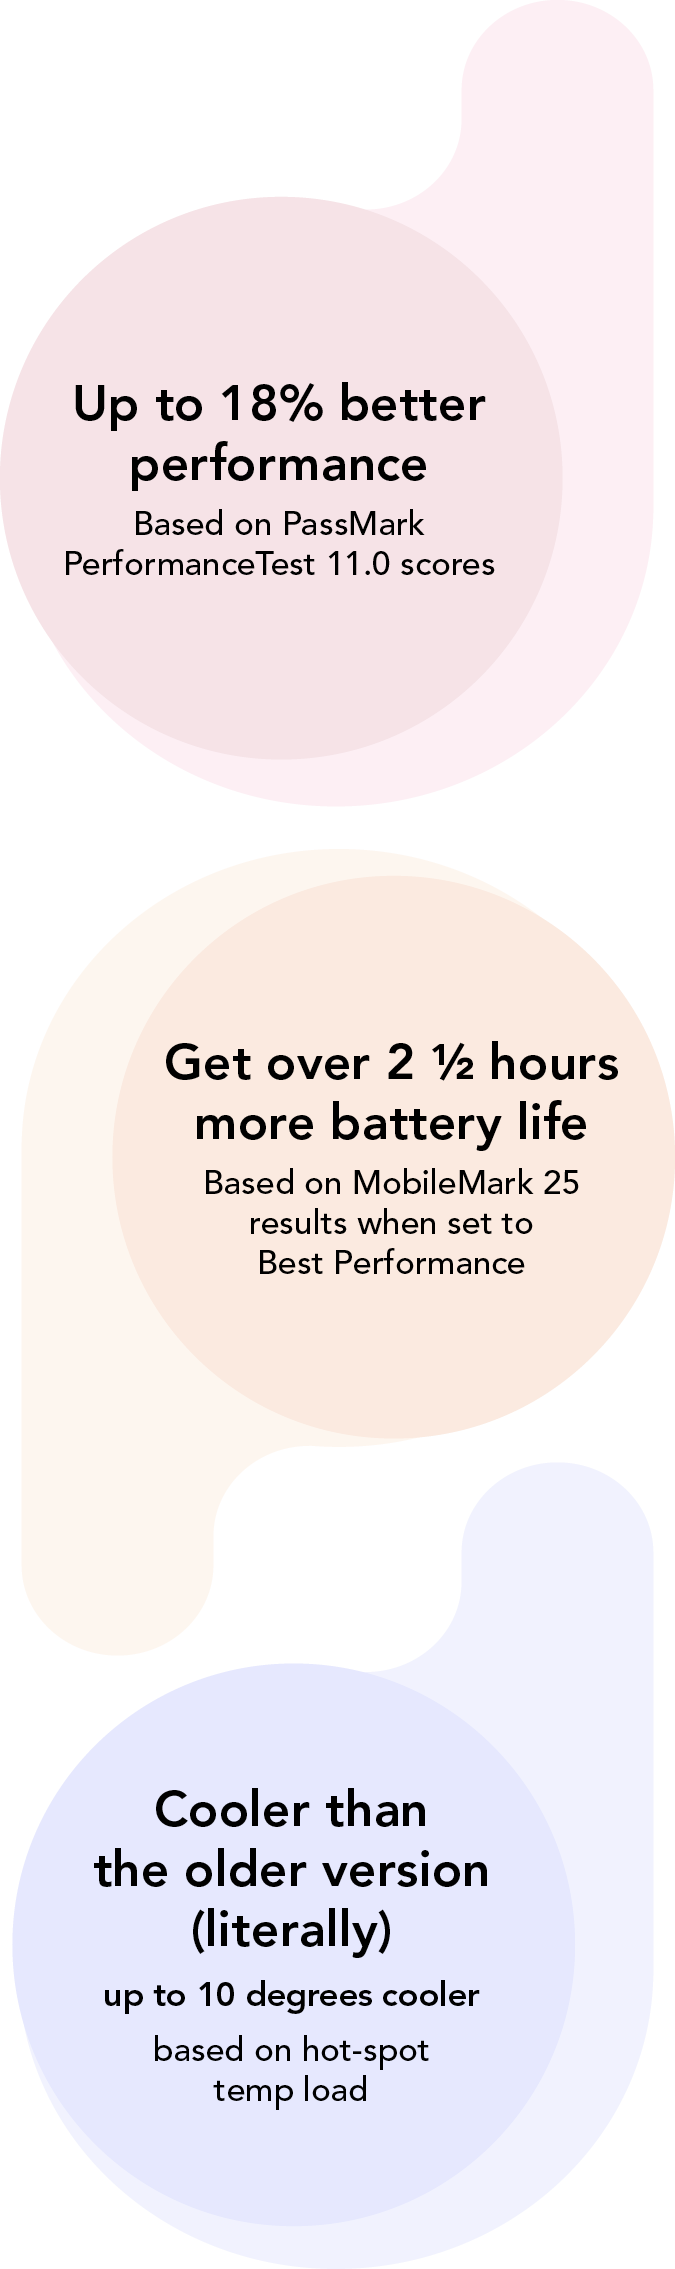 Up to 18% better performance (based on PassMark PerformanceTest 11.0 scores). Get over 2.5 hours more battery life (based on MobileMark 25 results when set to Best Performance). Cooler than the older version (literally) (up to 10 degrees cooler based on hot-spot temp load).